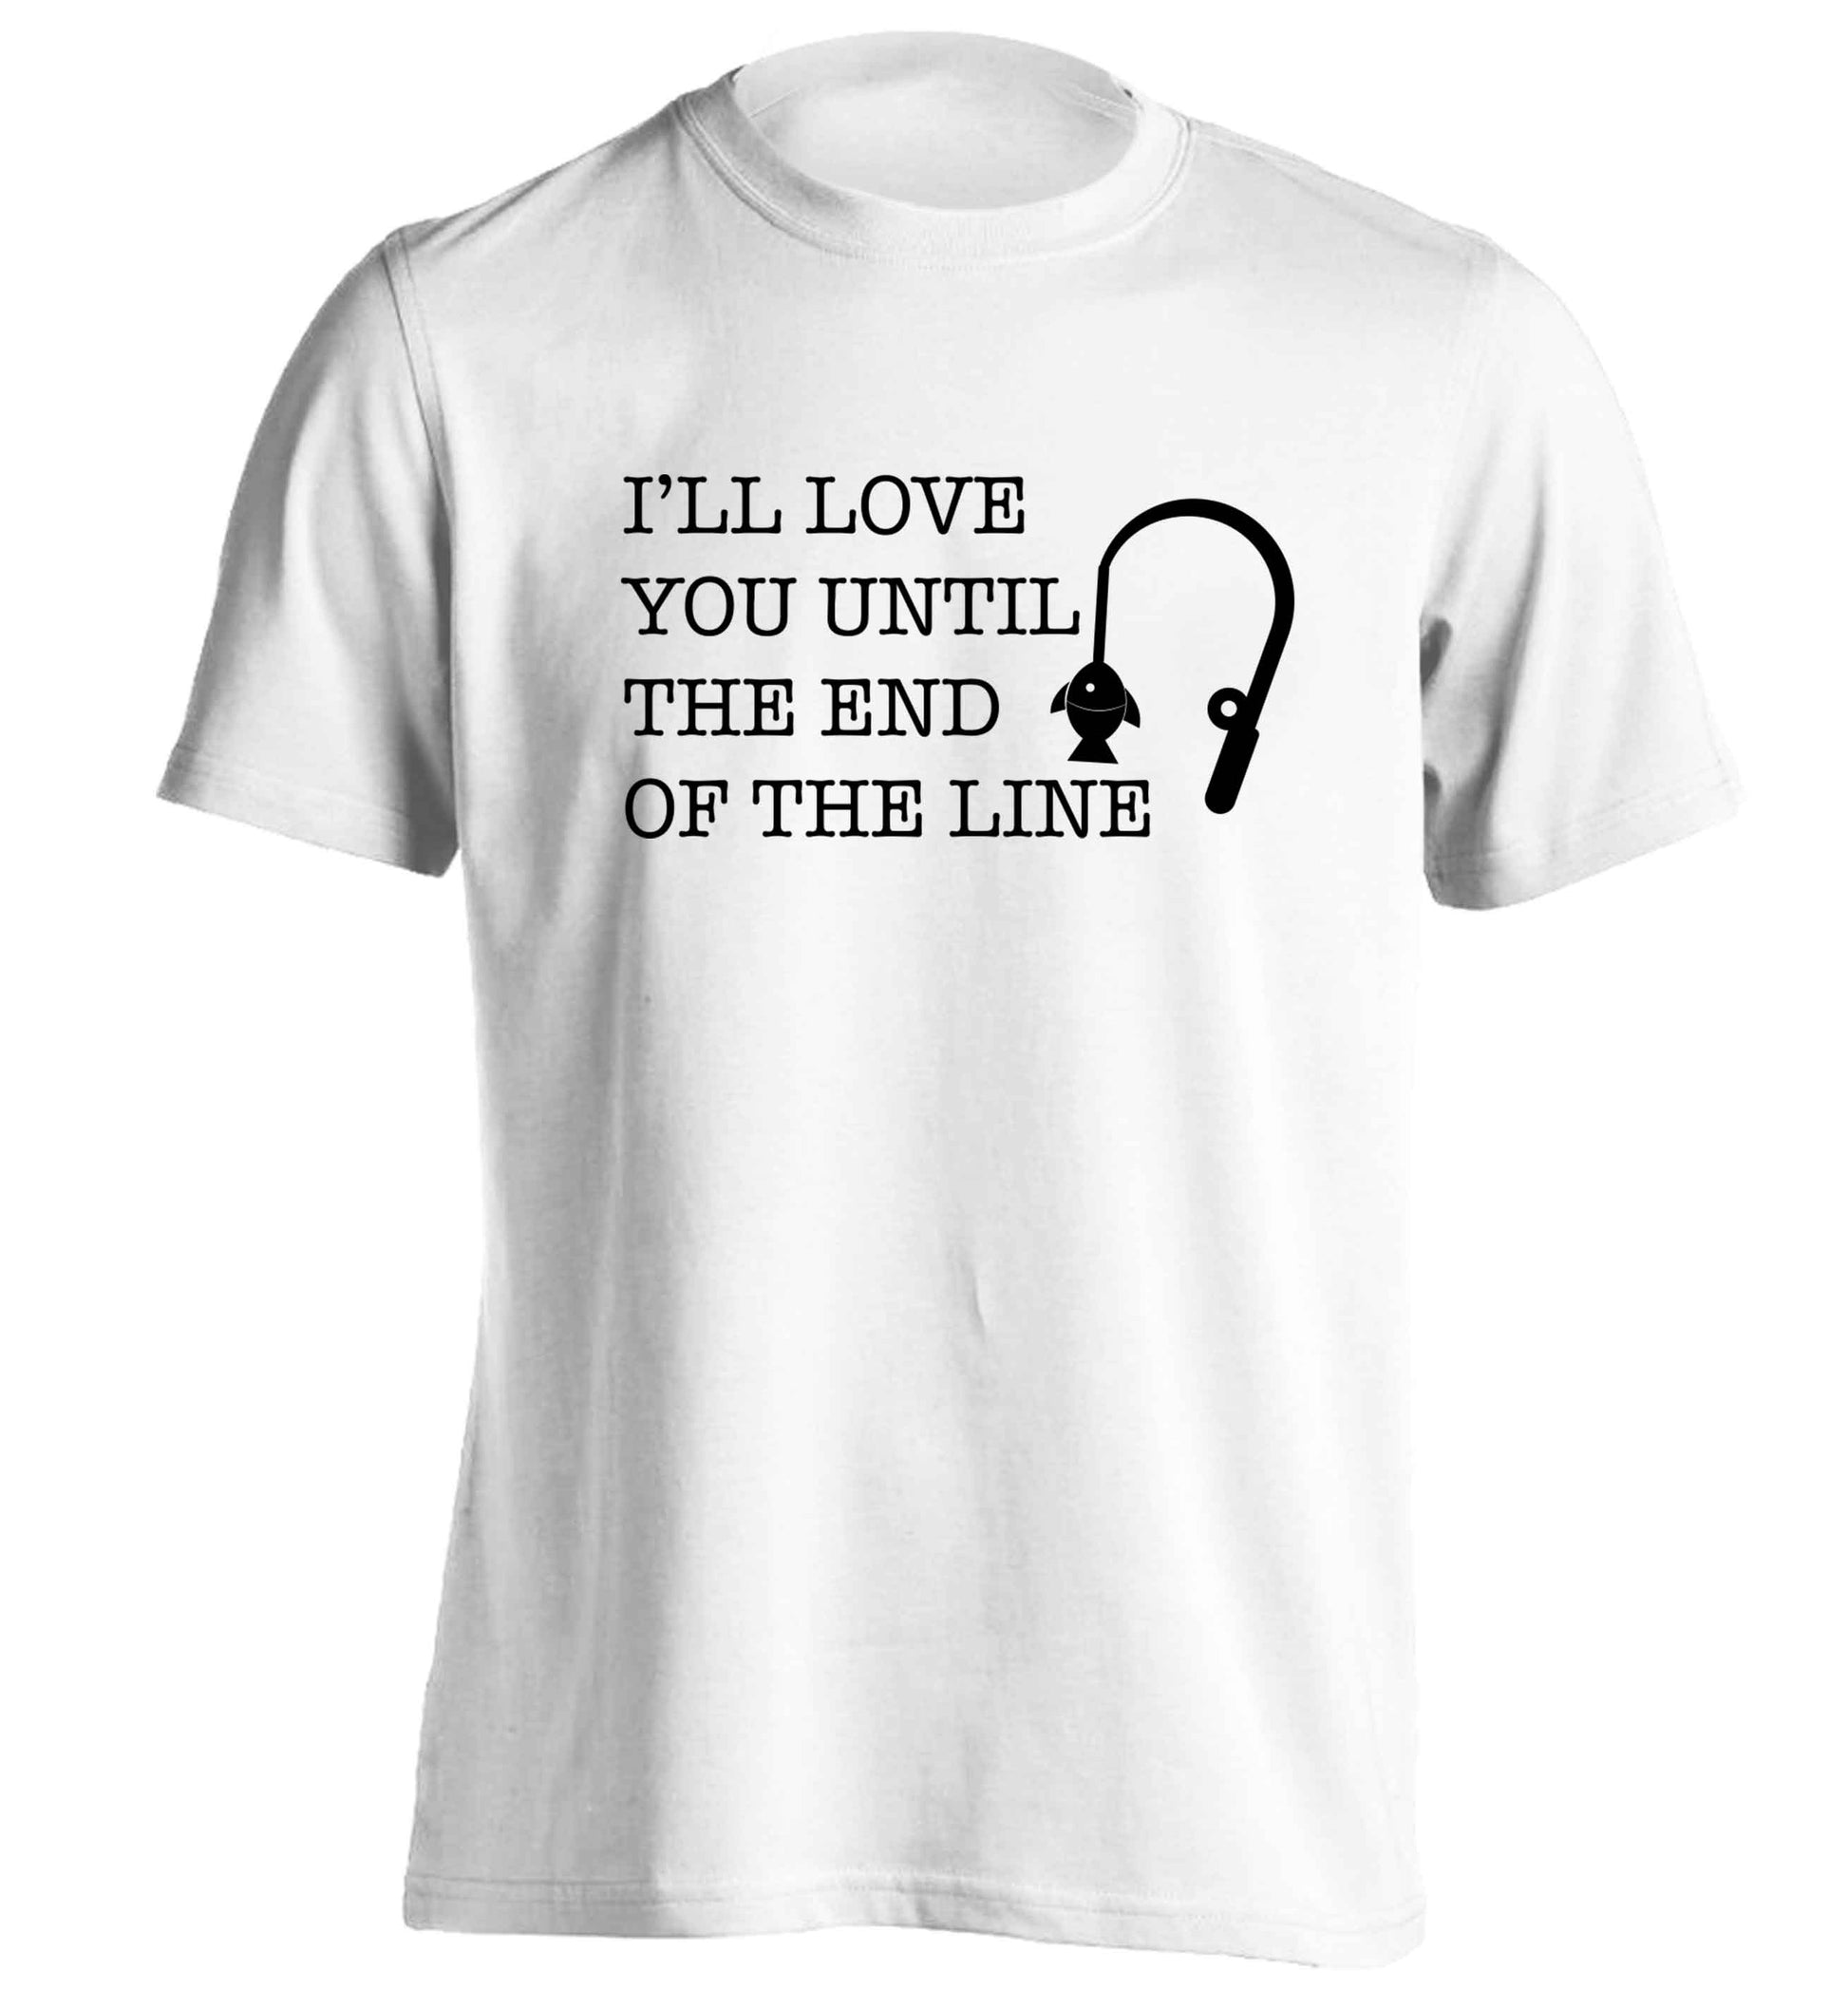 I'll love you until the end of the line adults unisex white Tshirt 2XL